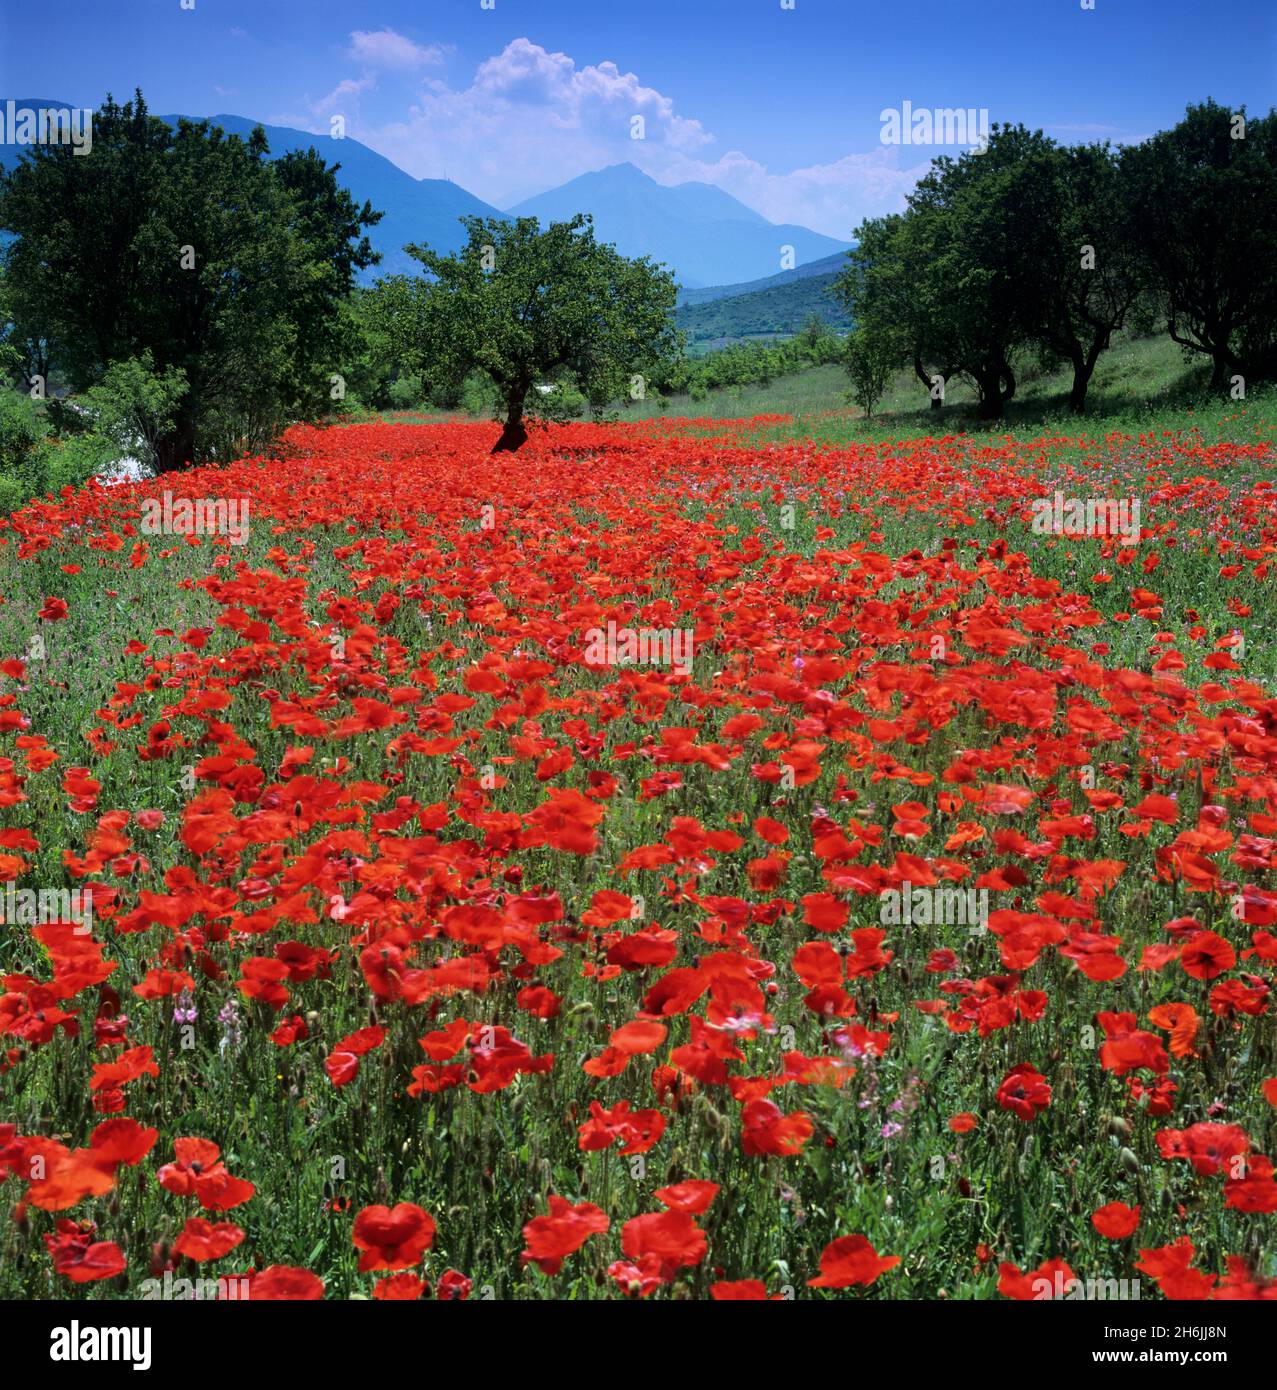 Red poppies growing in the Umbrian countryside, Umbria, Italy, Europe Stock Photo